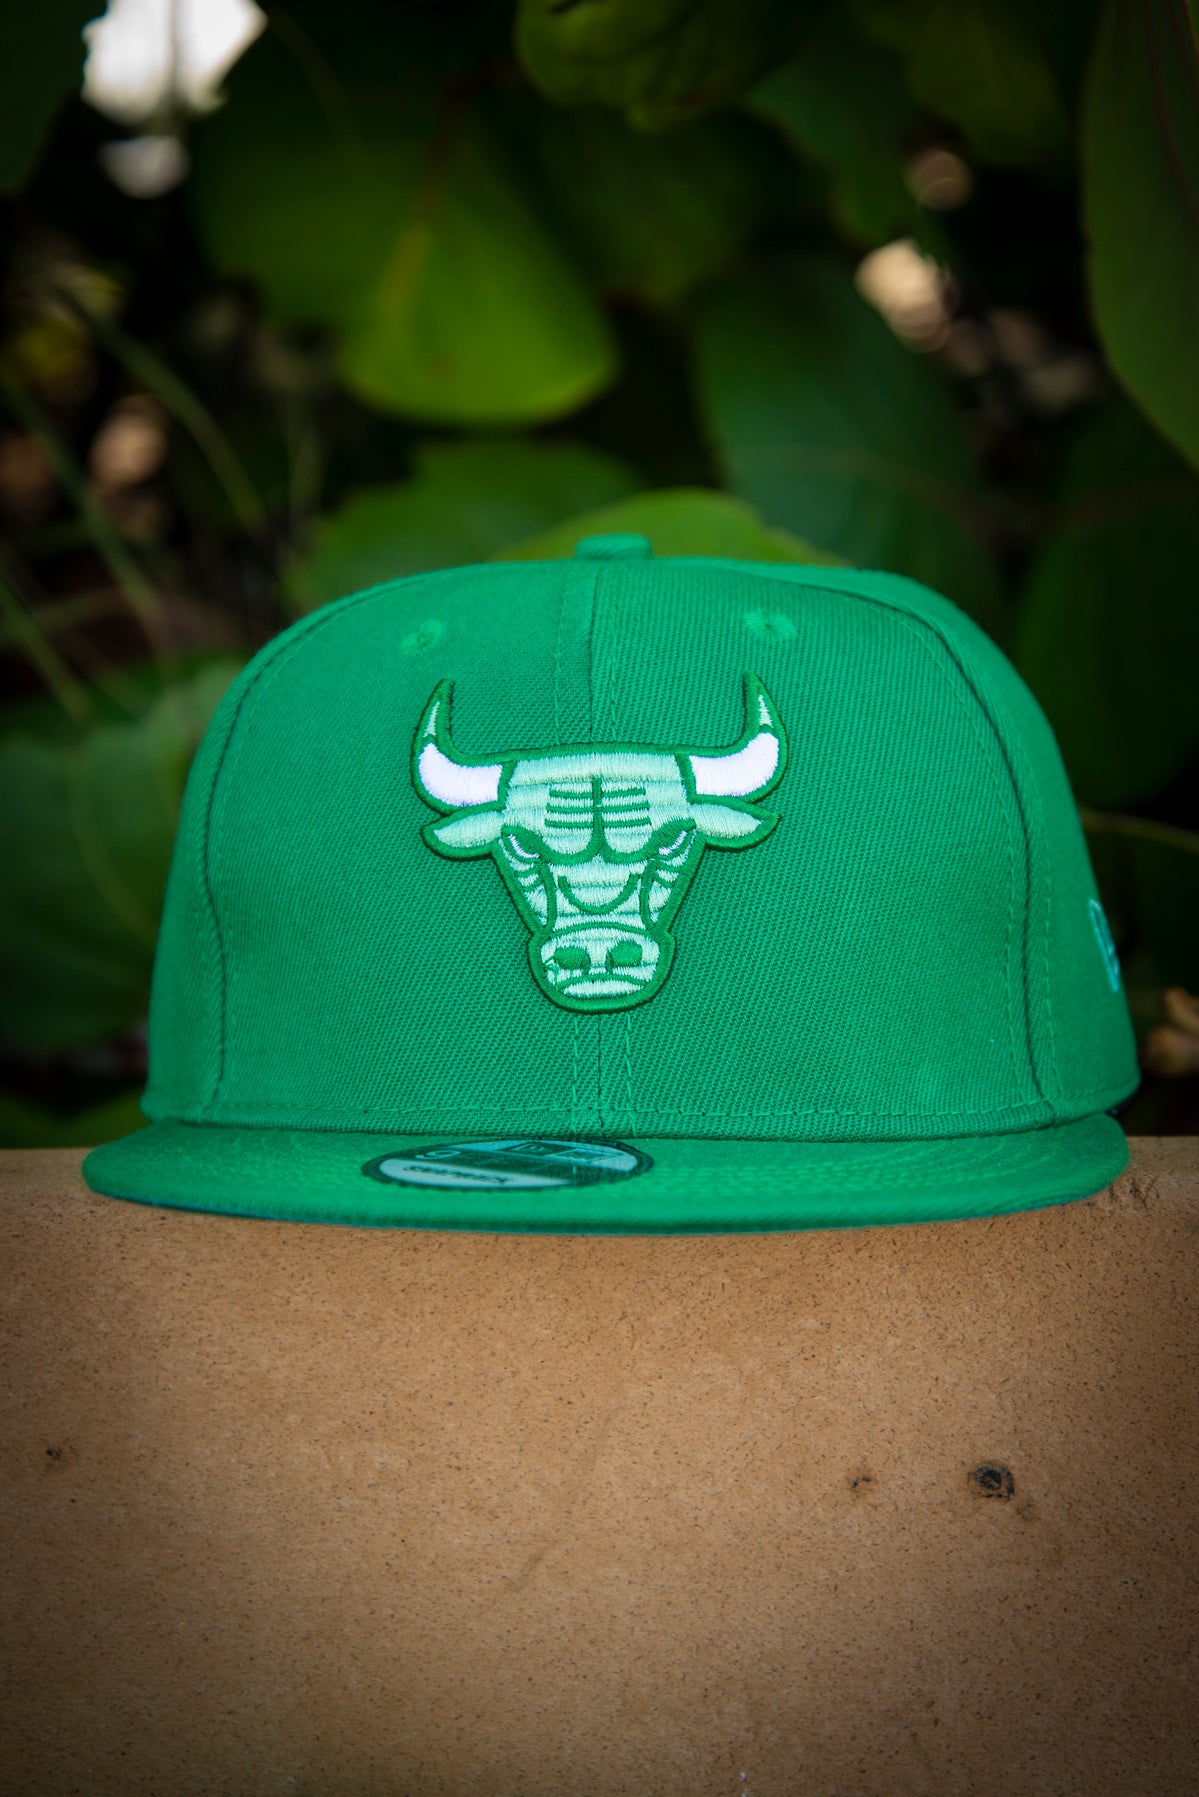 Chicago Bulls Earth 6X Champs 9FIFTY New Era Fits Snapback Hat by Devious Elements Apparel